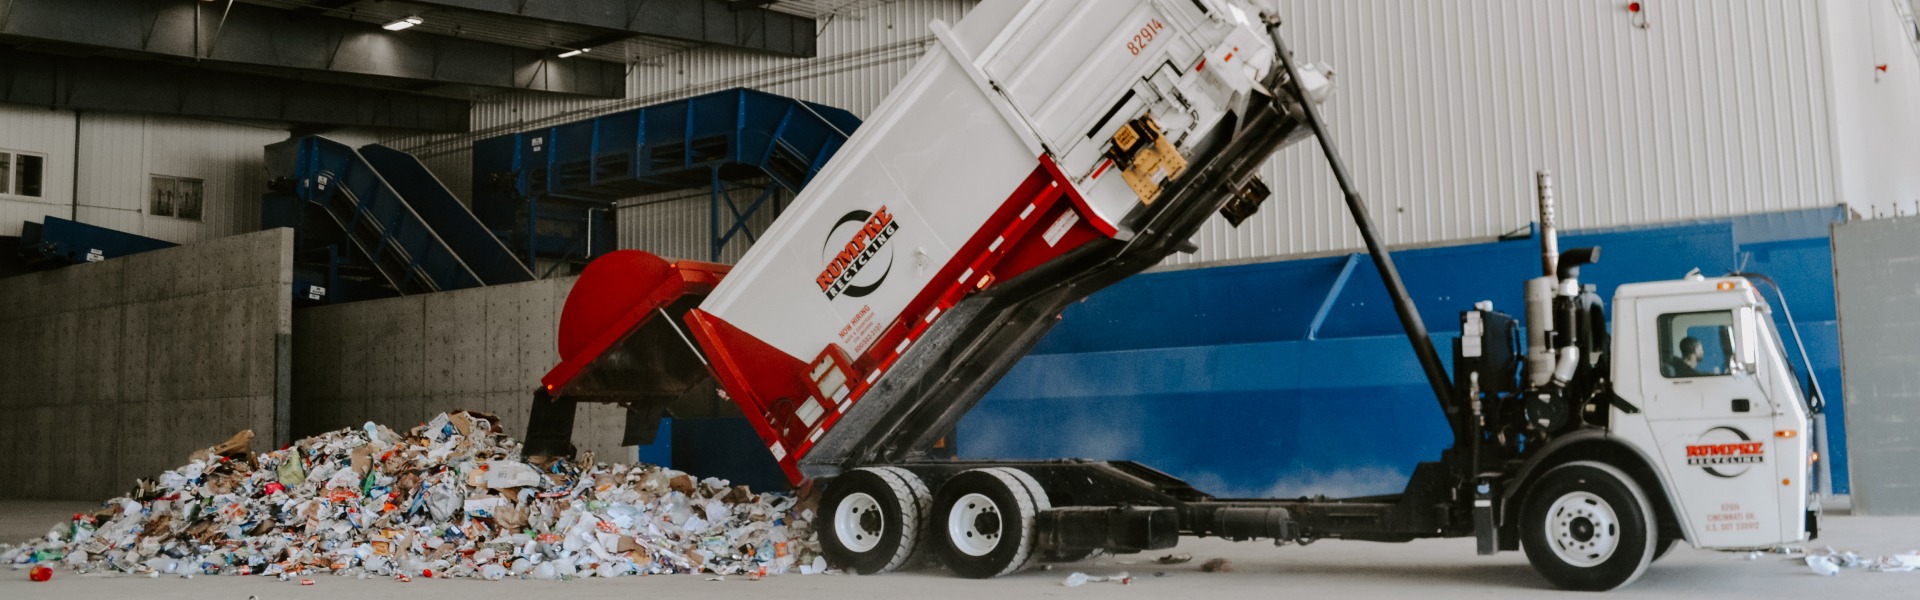 Rumpke Recycling Truck Dropping Off Recyclables At Recycling Facility